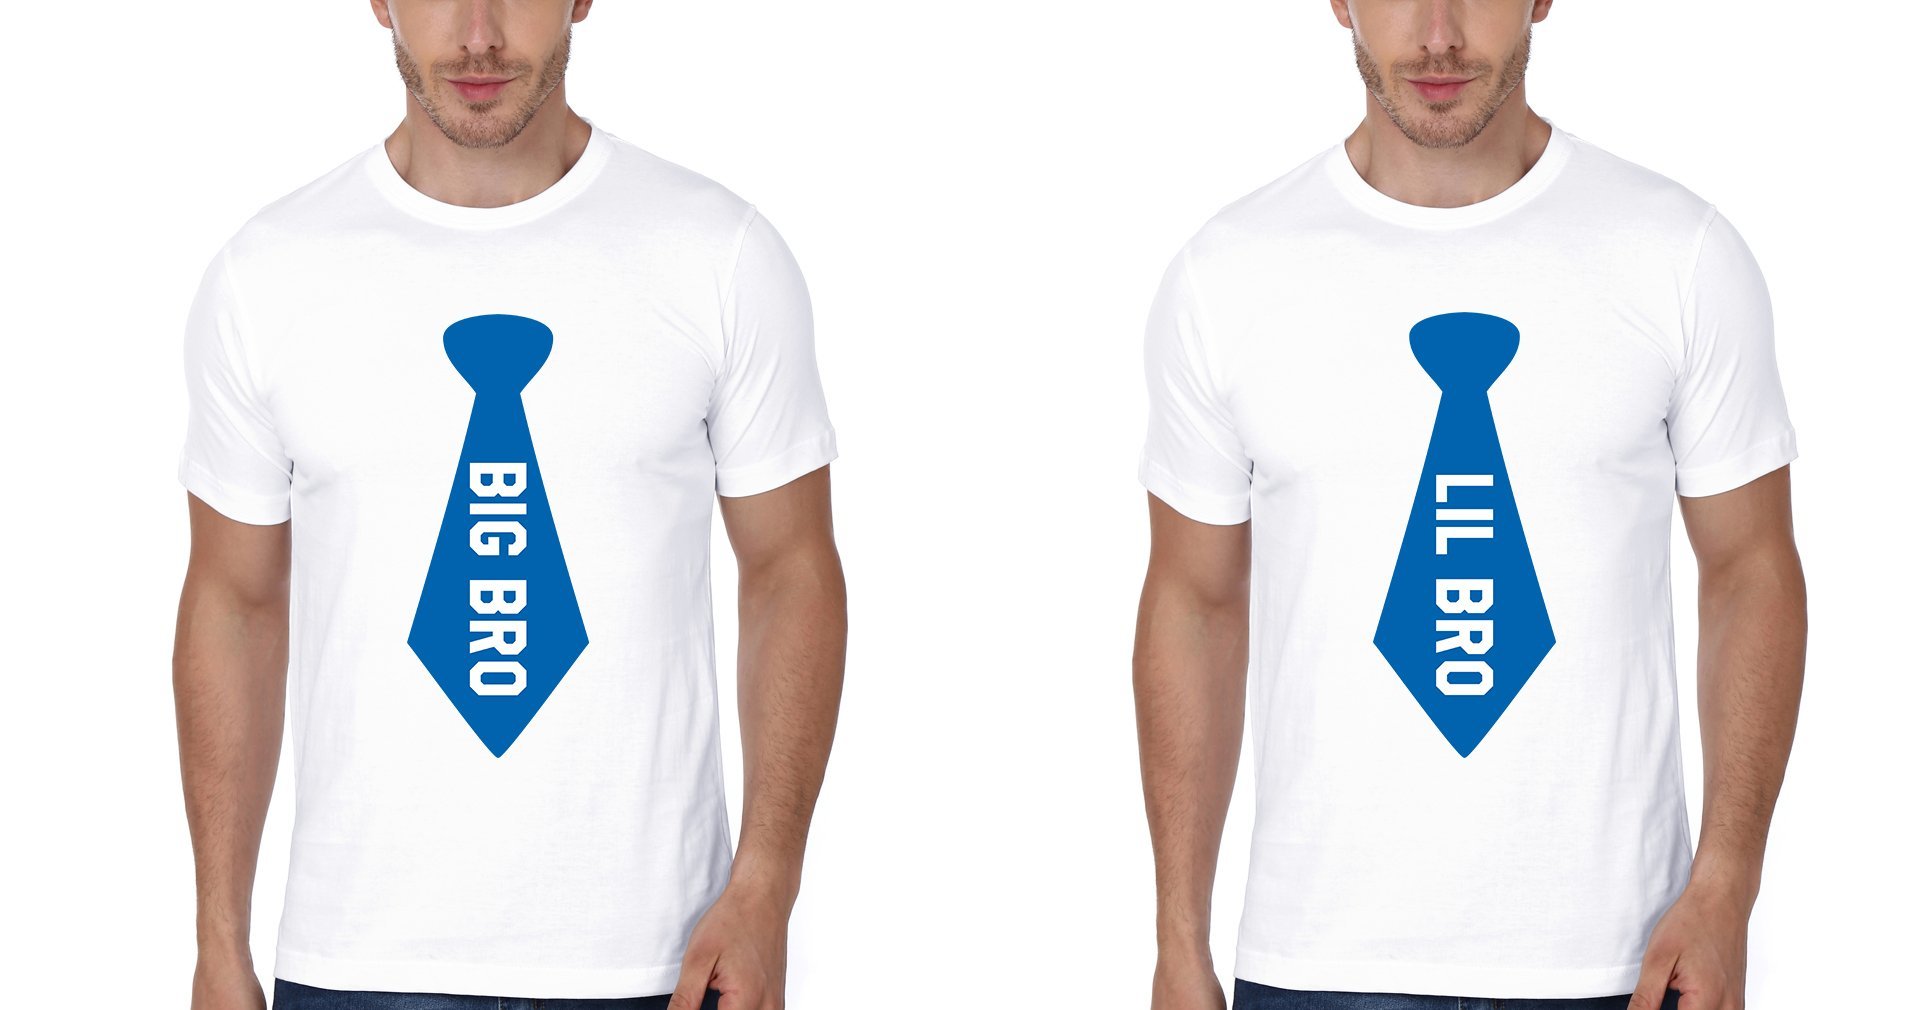 Big Bro Lil Bro Blue Tie Brother-Brother Half Sleeves T-Shirts -FunkyTradition - FunkyTradition